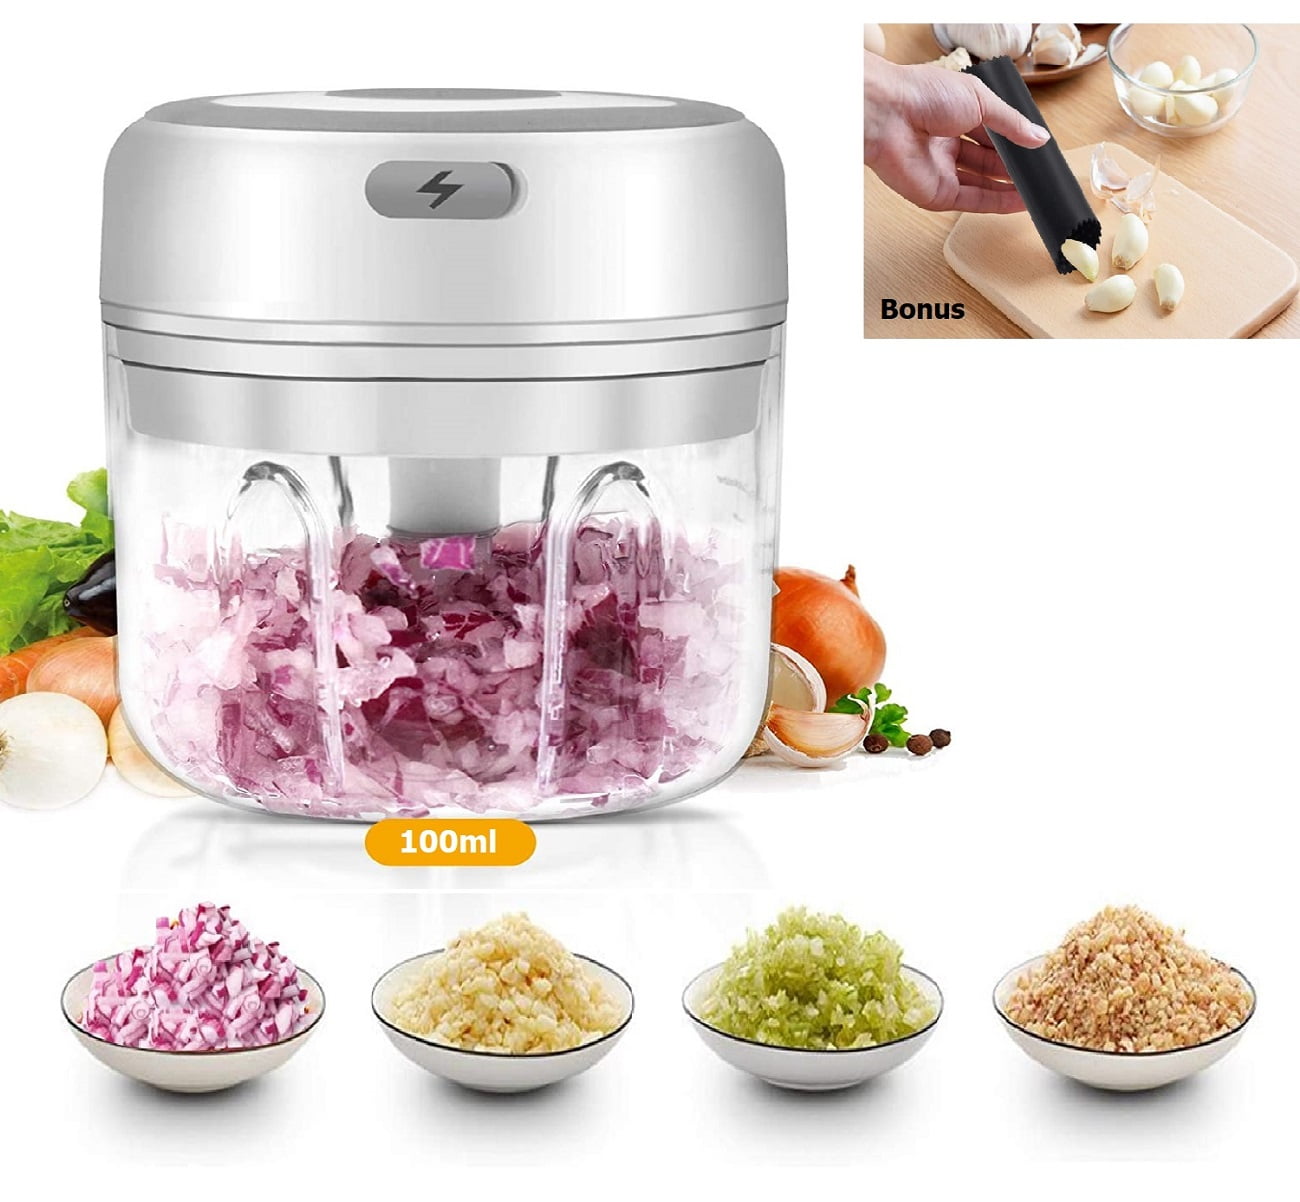 Food Maker Mini Cute and Small Food Processor Puree Blender Grinder Chopper  1.2 Cup Glass Bowl with 6 Blade Electric Small Household Multifunctional  Mincer For Garlic, Stirring, And Complementary Food